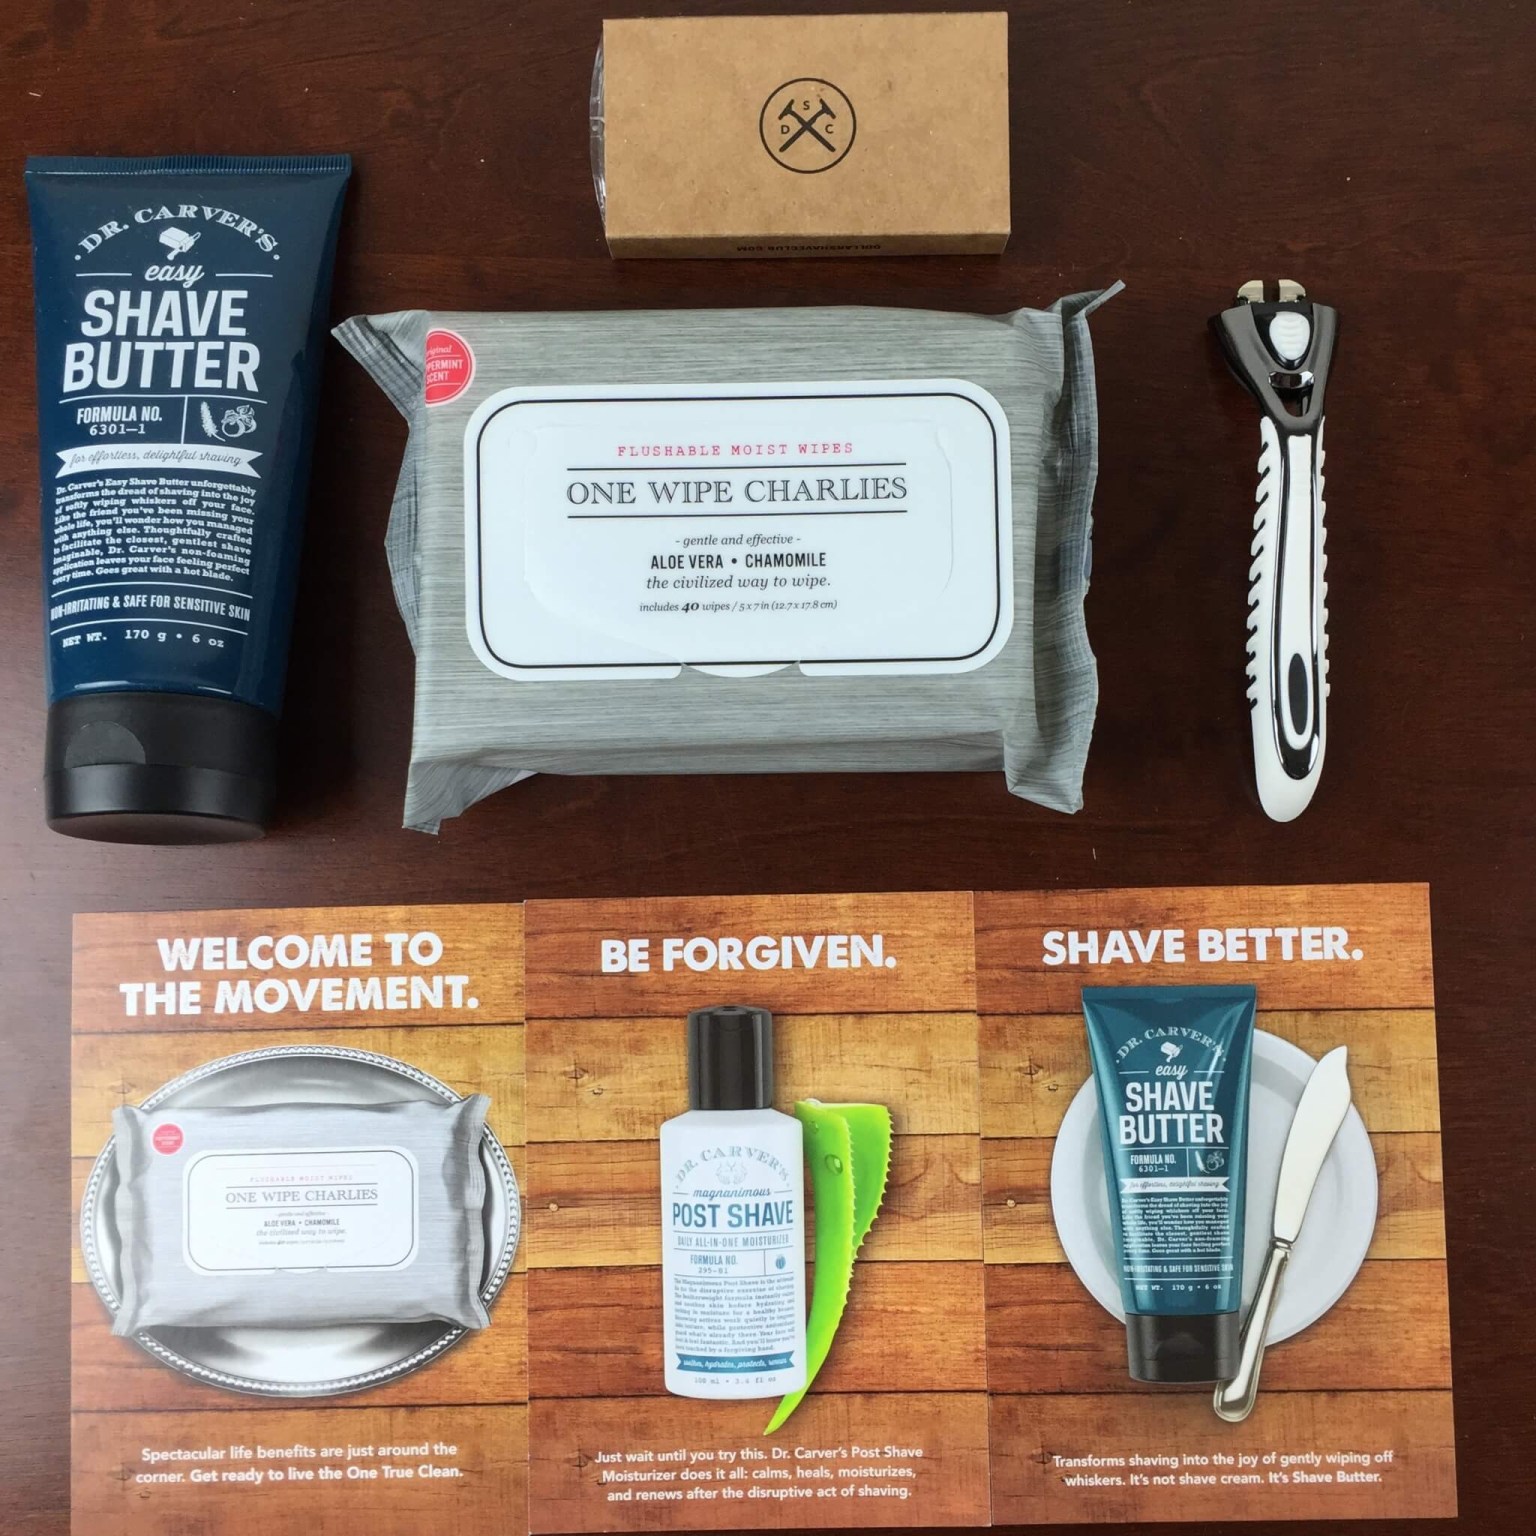 Dollar Shave Club Reviews: Get All The Details At Hello Subscription